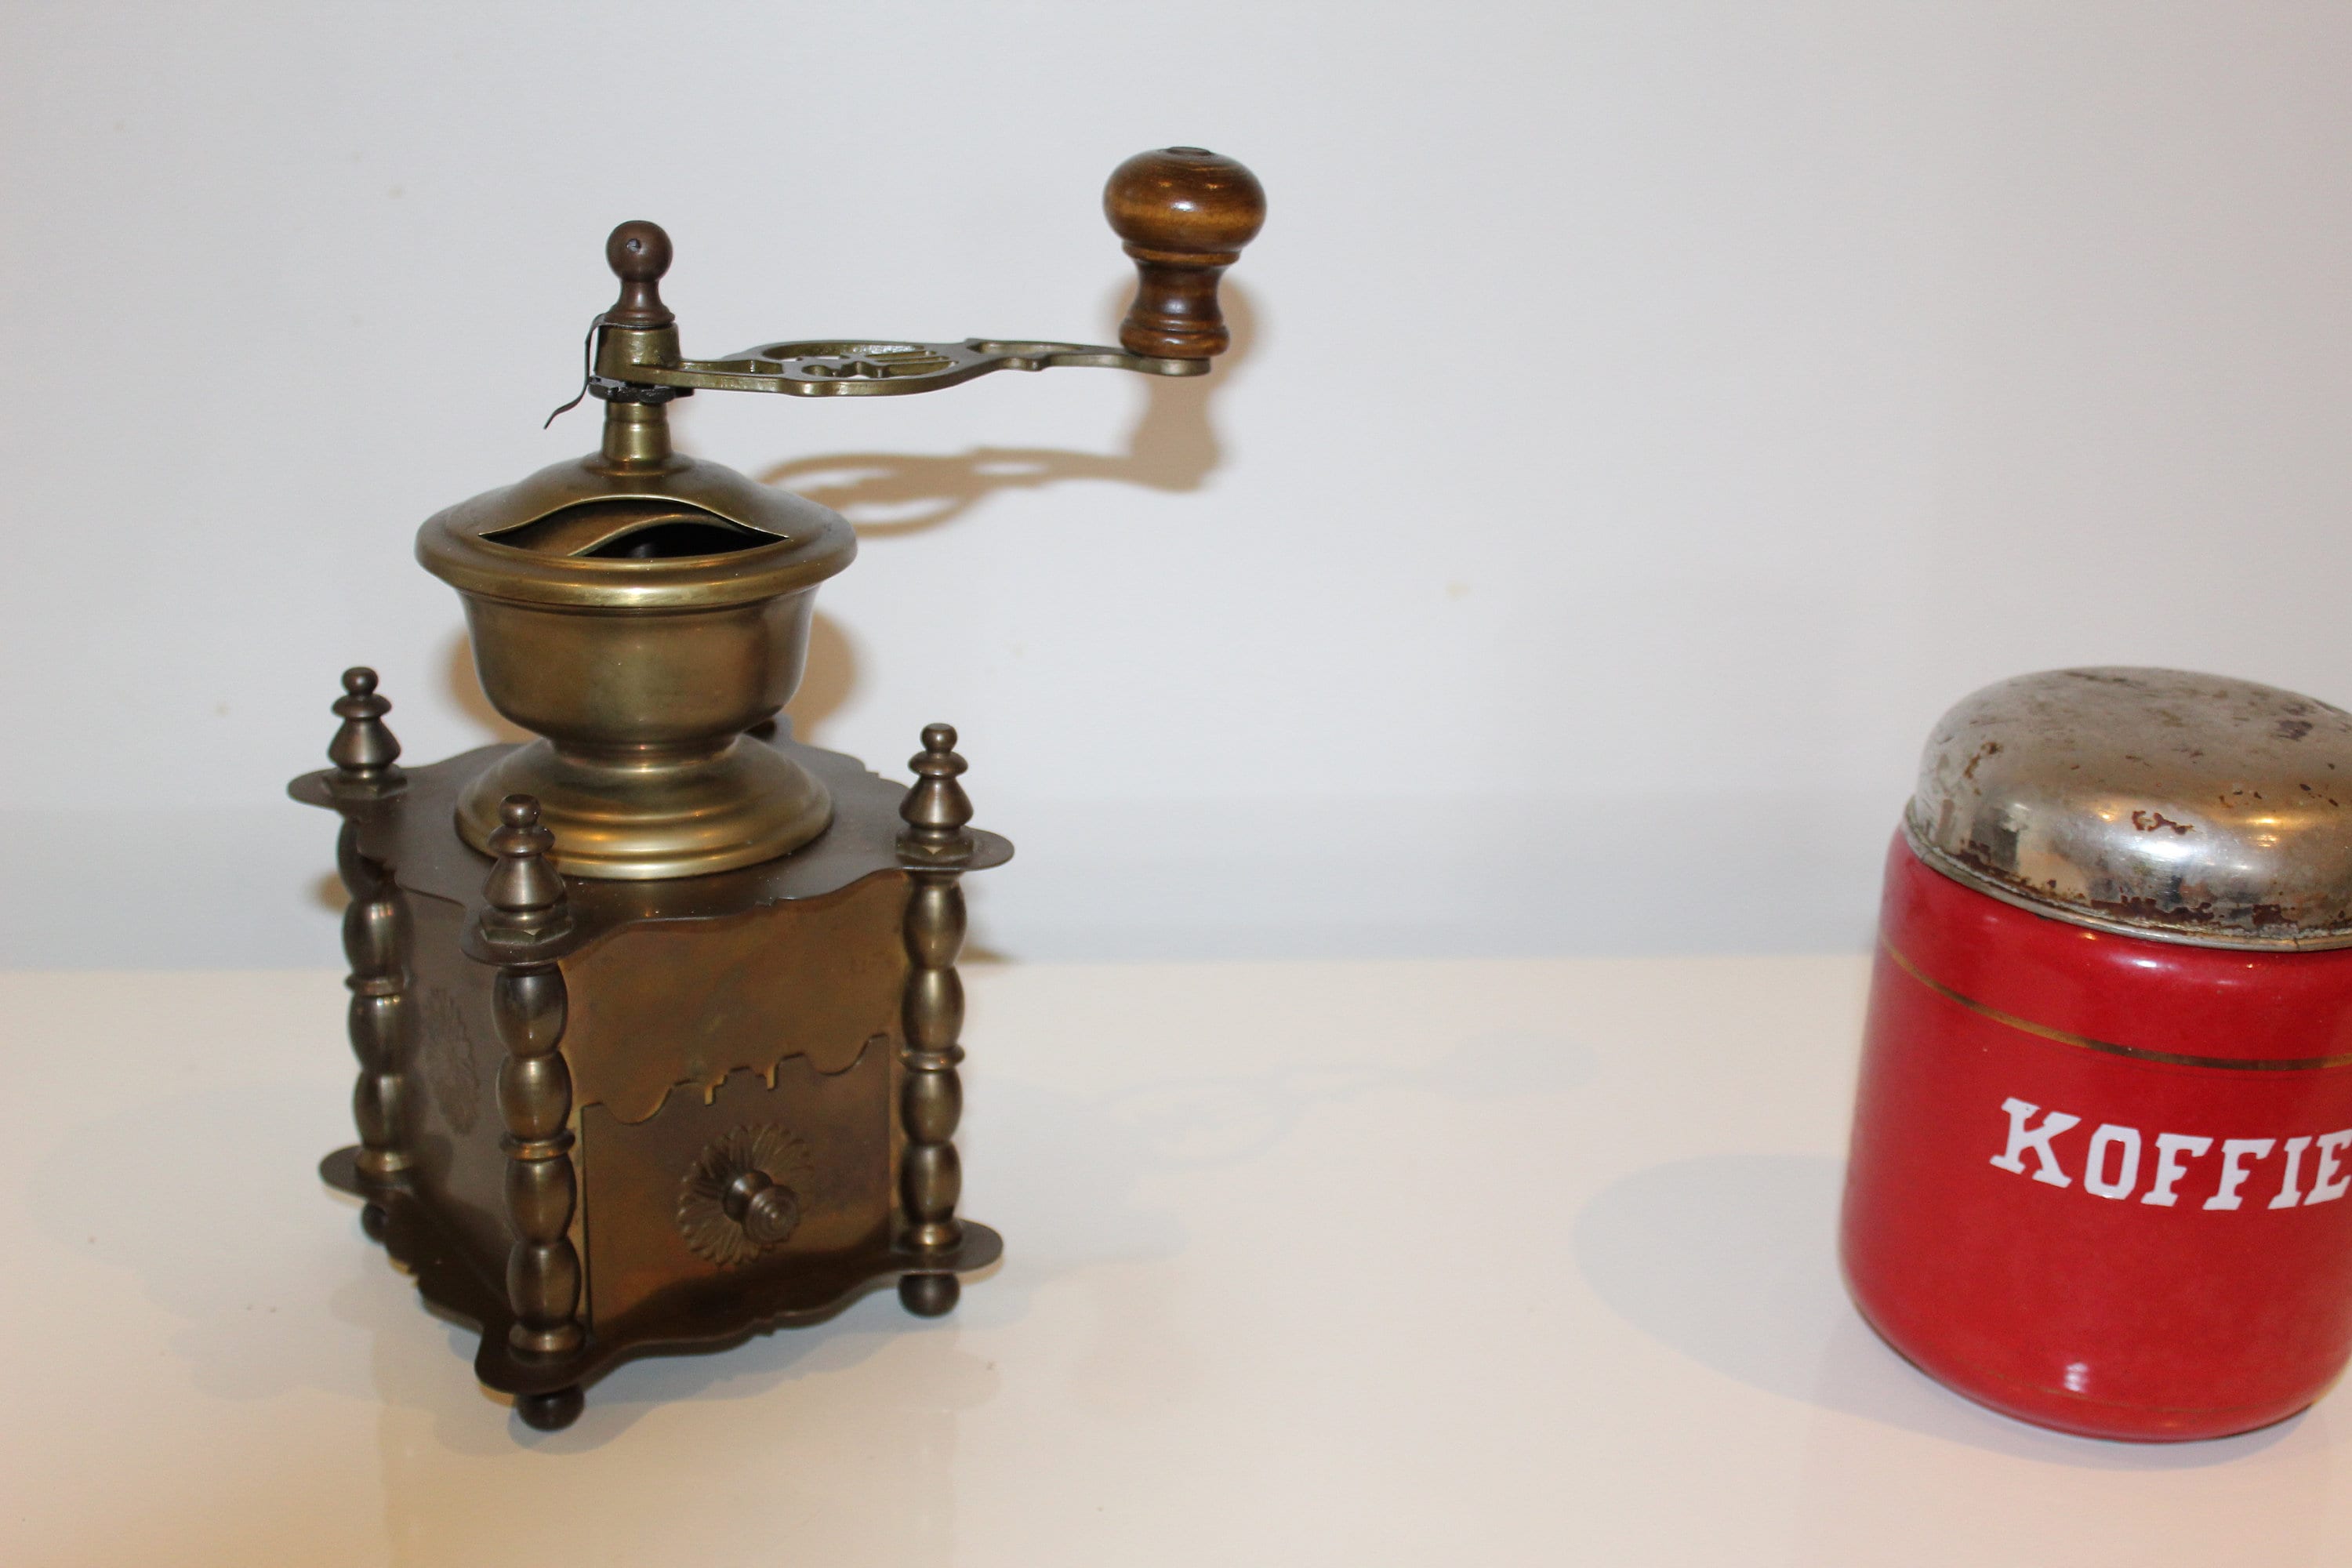 Copper Coffee Grinder in Baroque Style, Old-fashioned Coffee Grinder,  Midcentury Coffee Grinder From Years Gone By, Utensil Kitchen. 